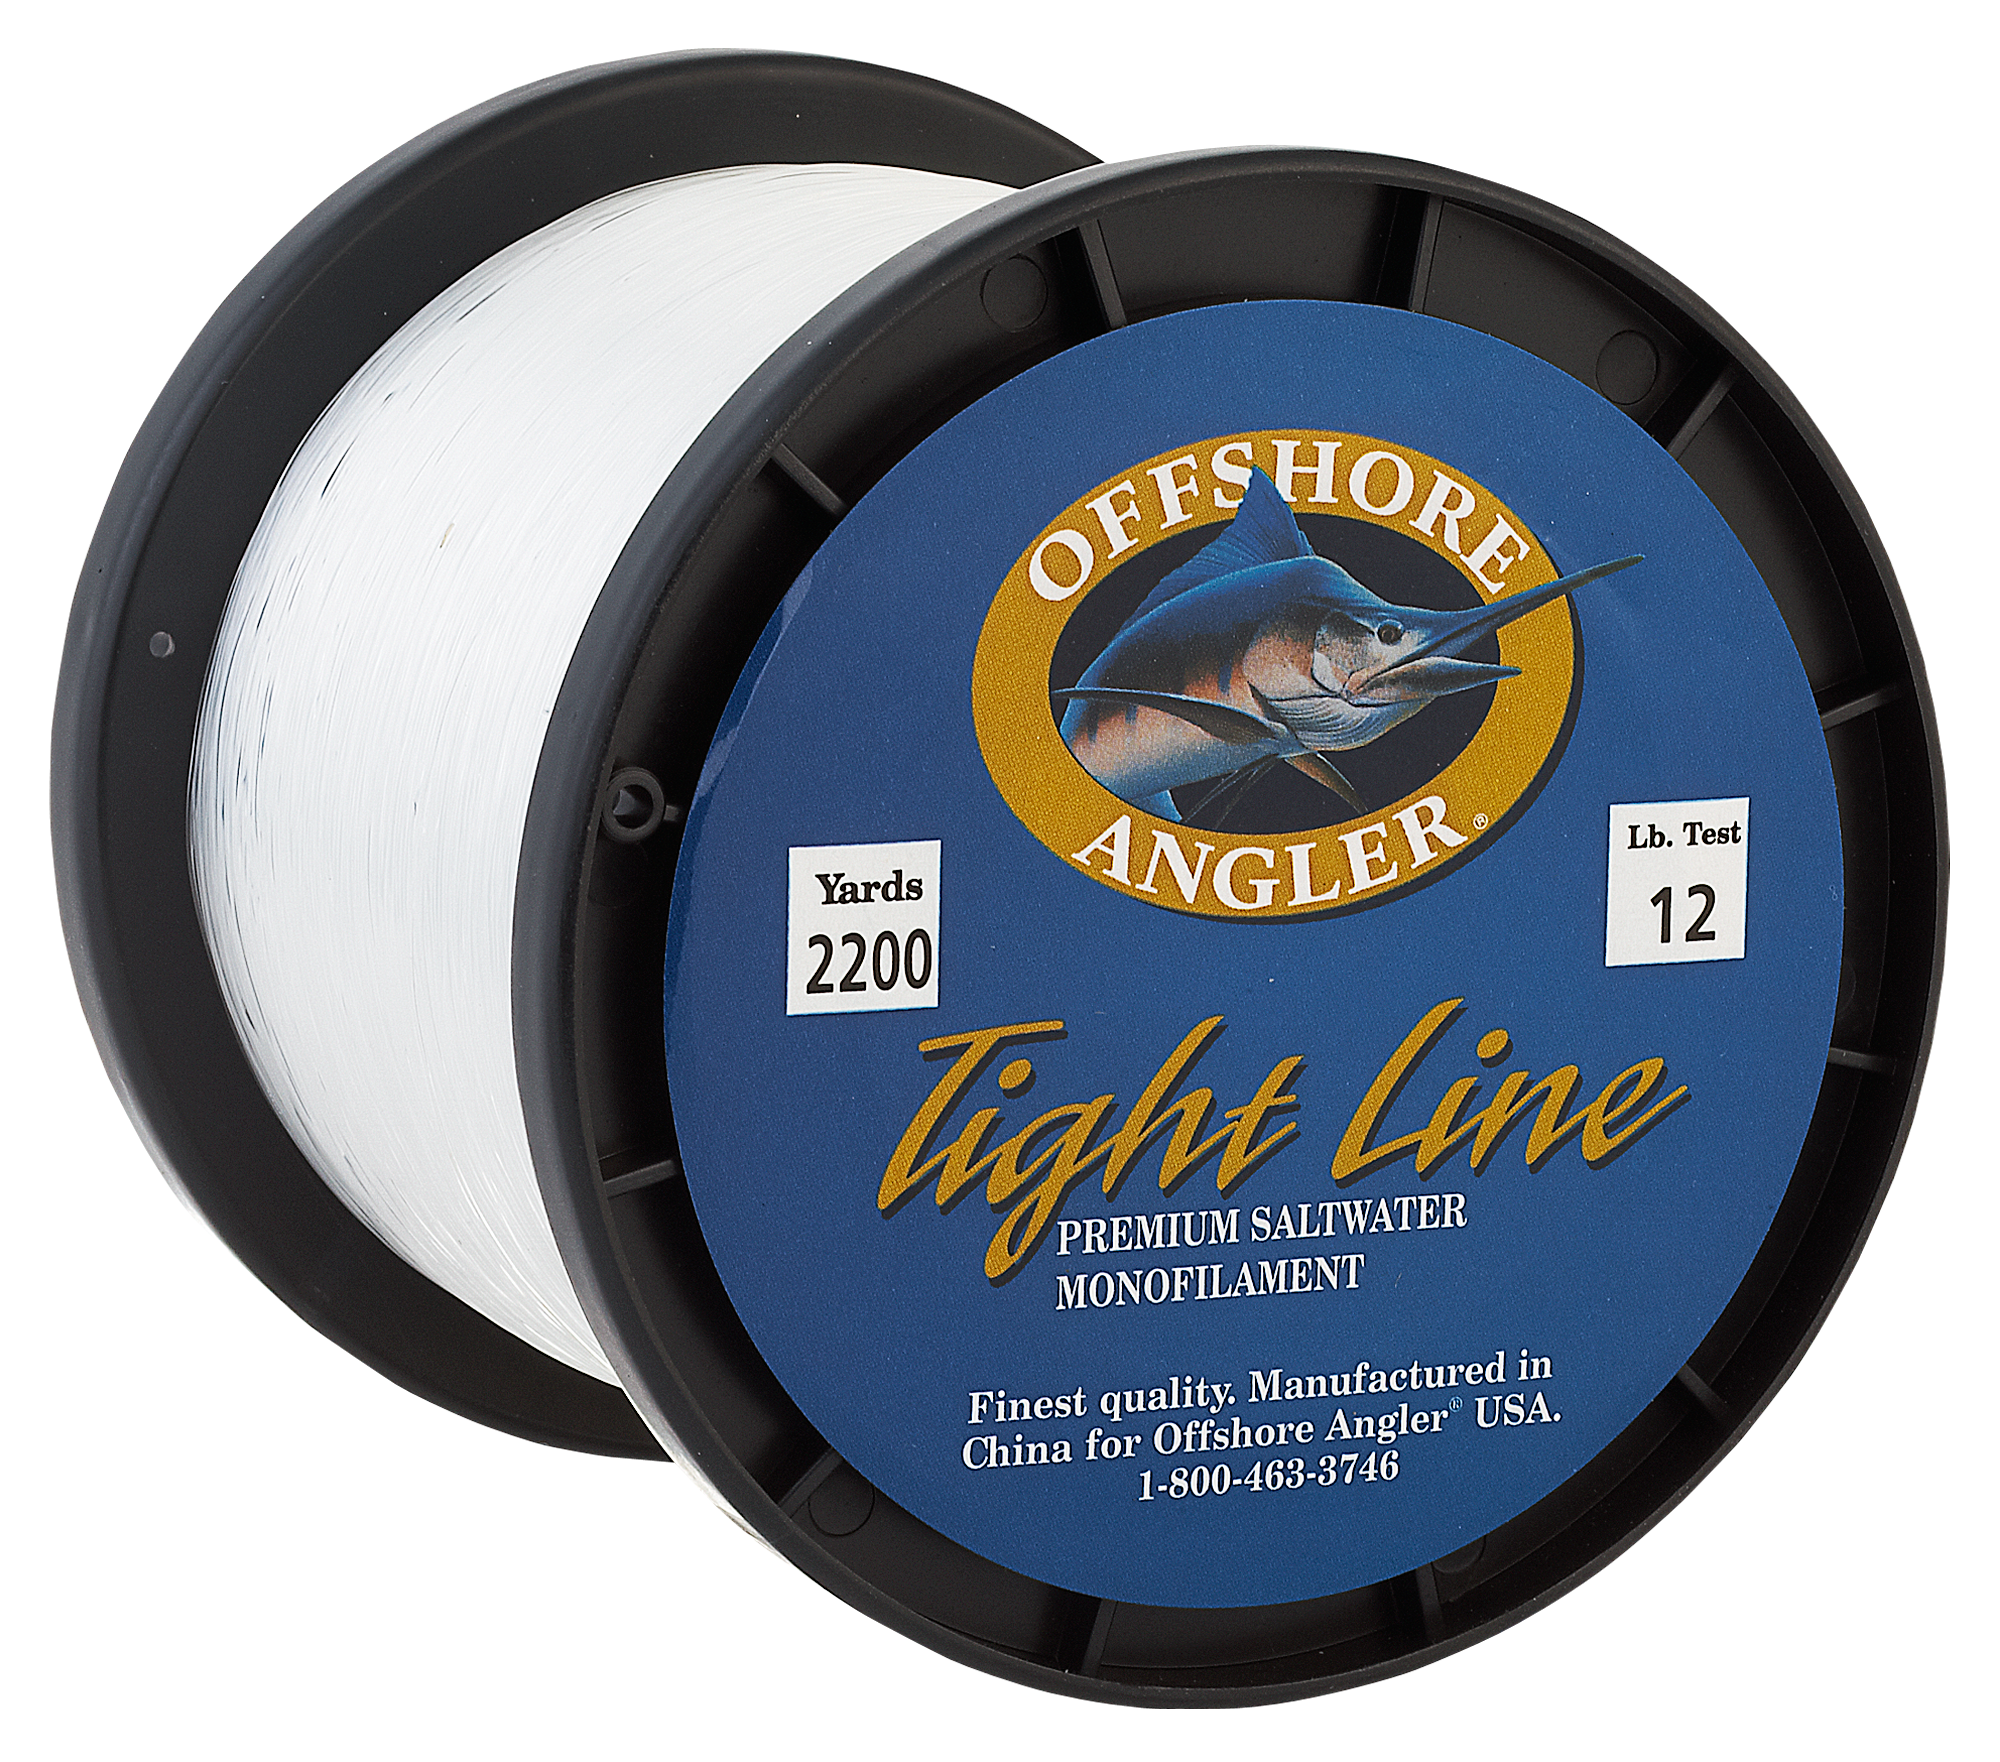 Offshore Angler Tight Line